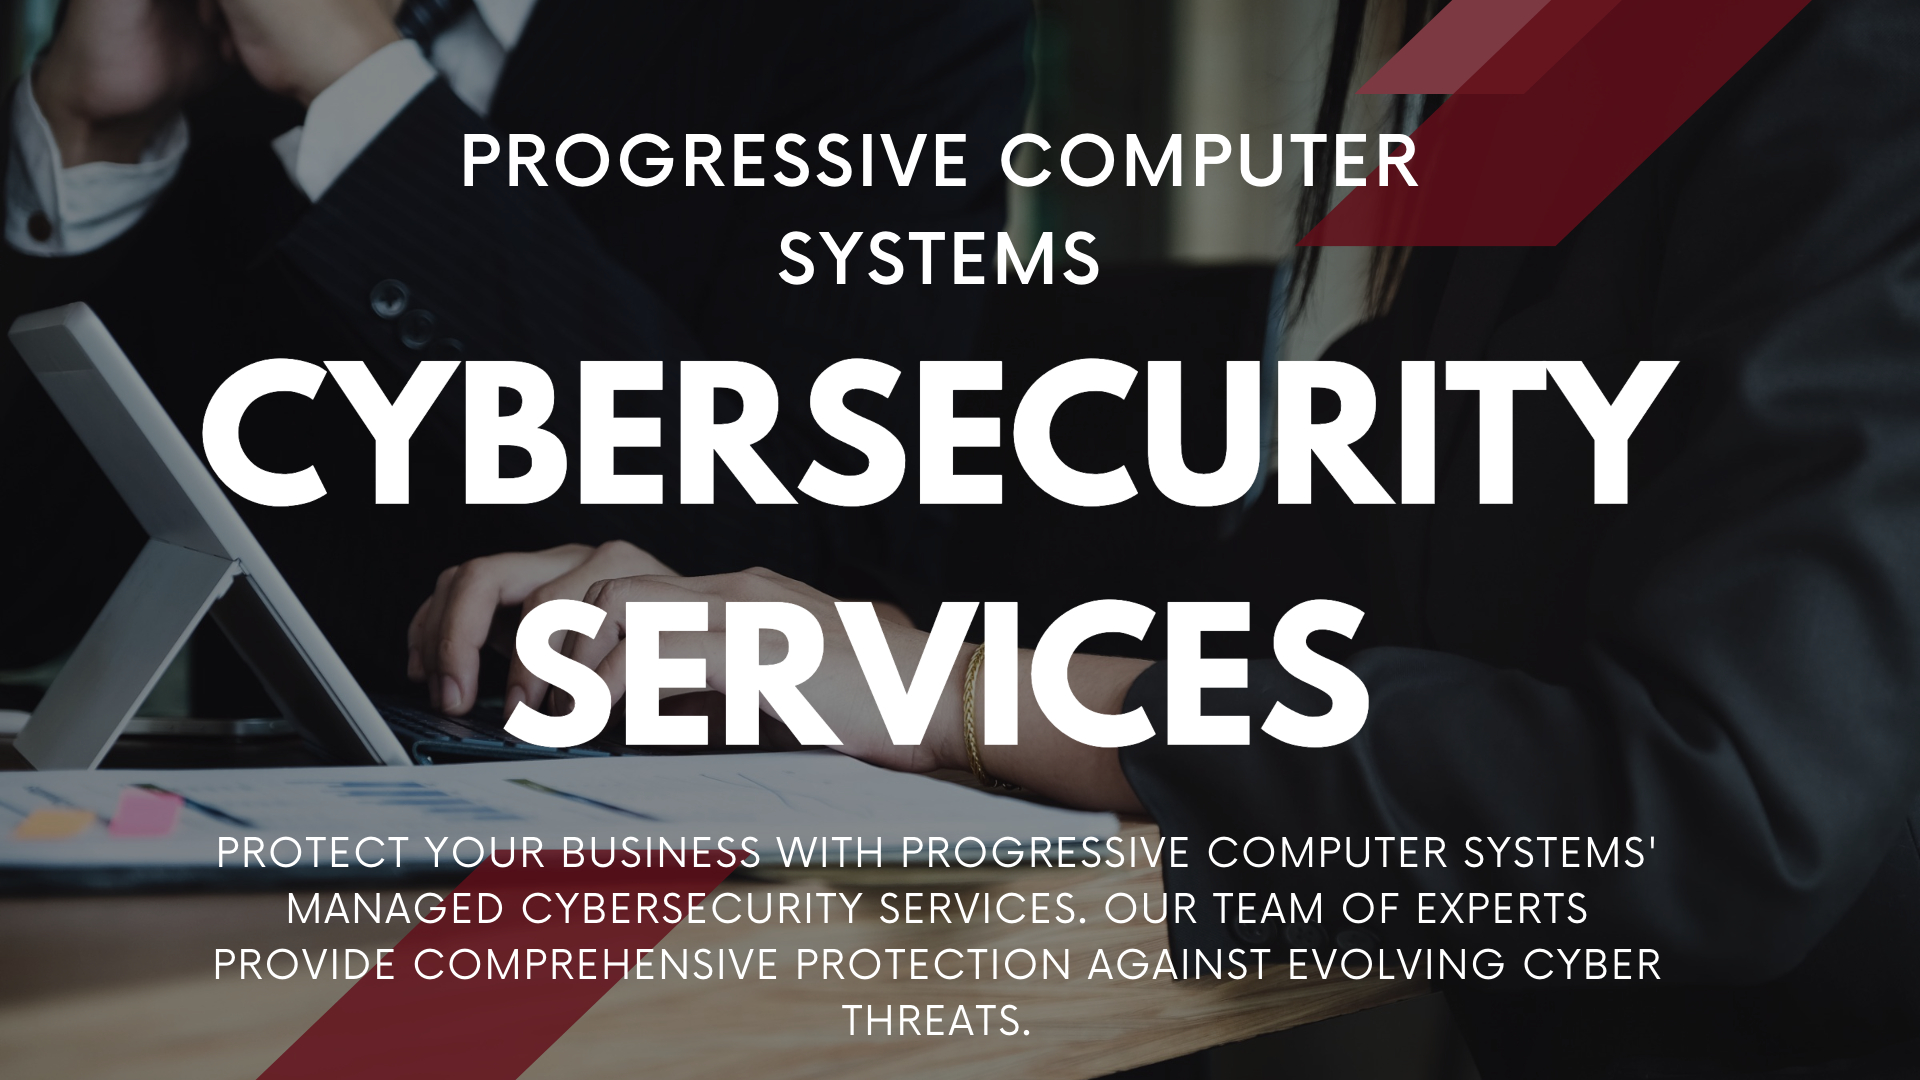 Managed Cybersecurity Services